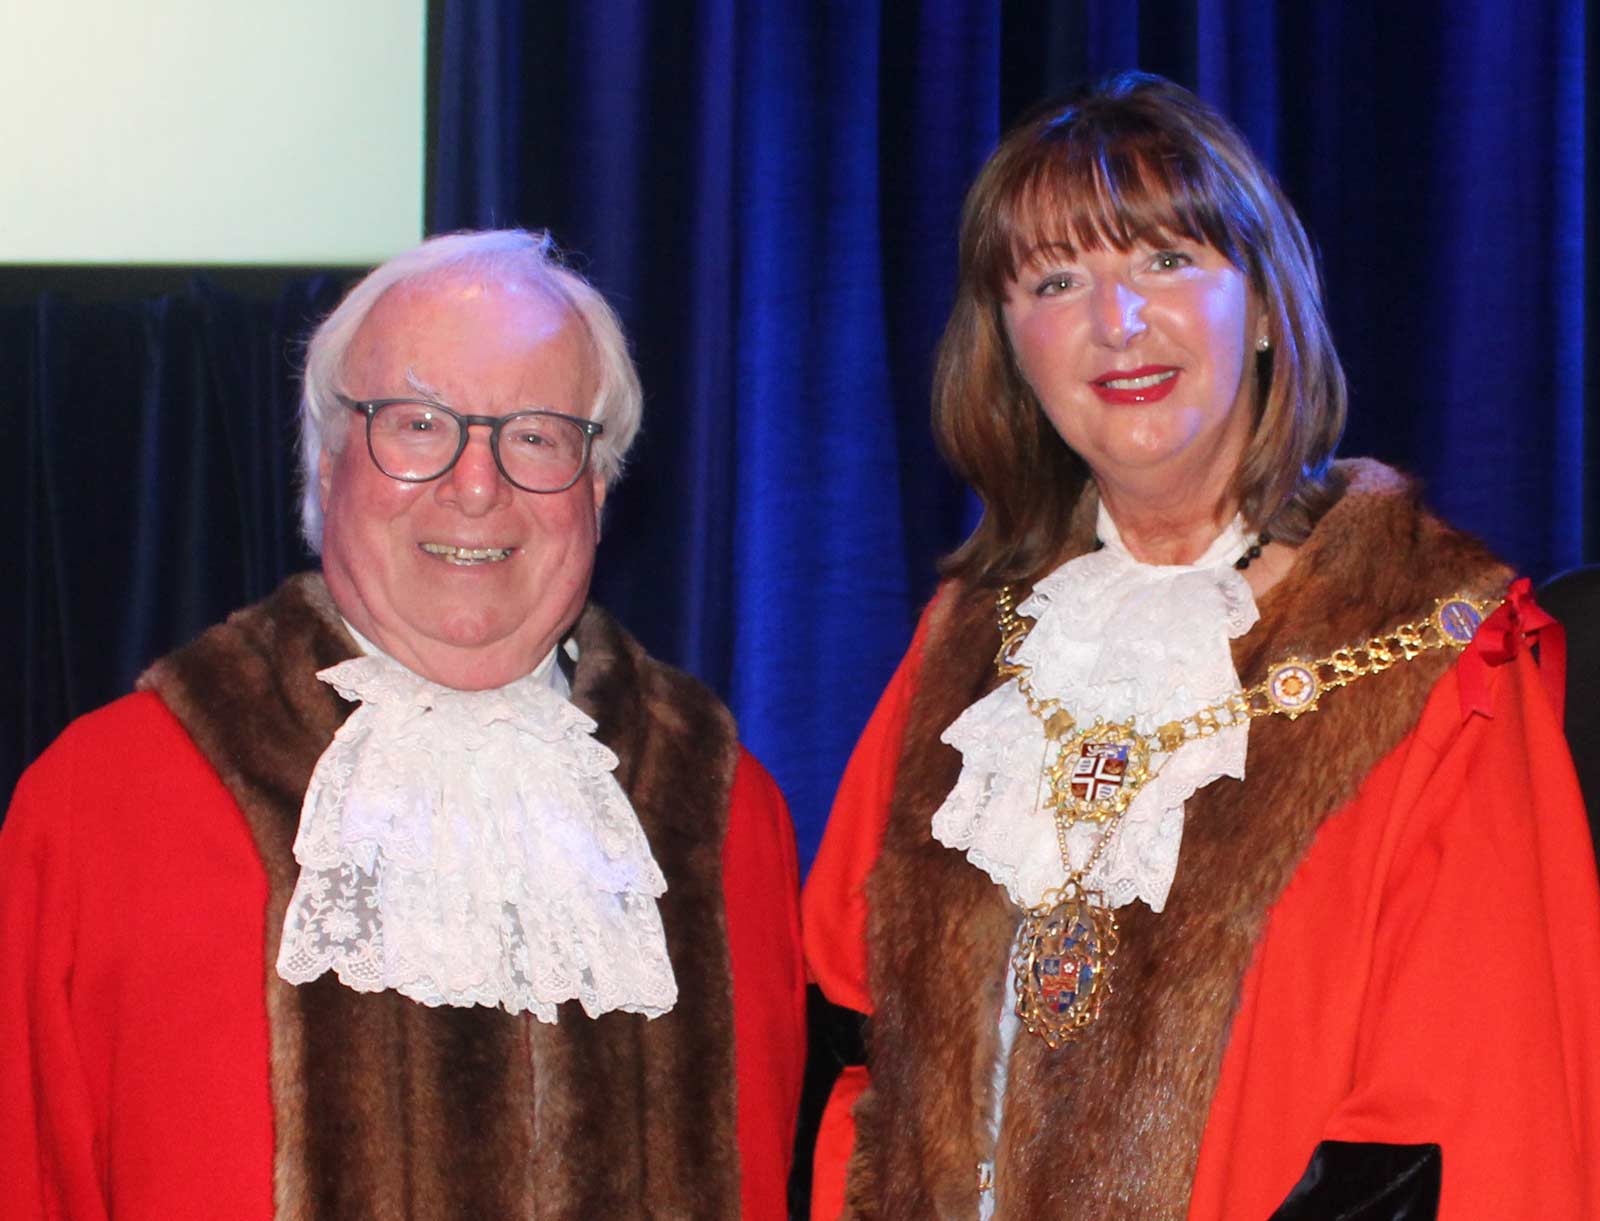 Left to right: Former Mayor of the Borough of Harrogate Councillor Nick Brown and new Mayor of the Borough of Harrogate Councillor Anne Jones